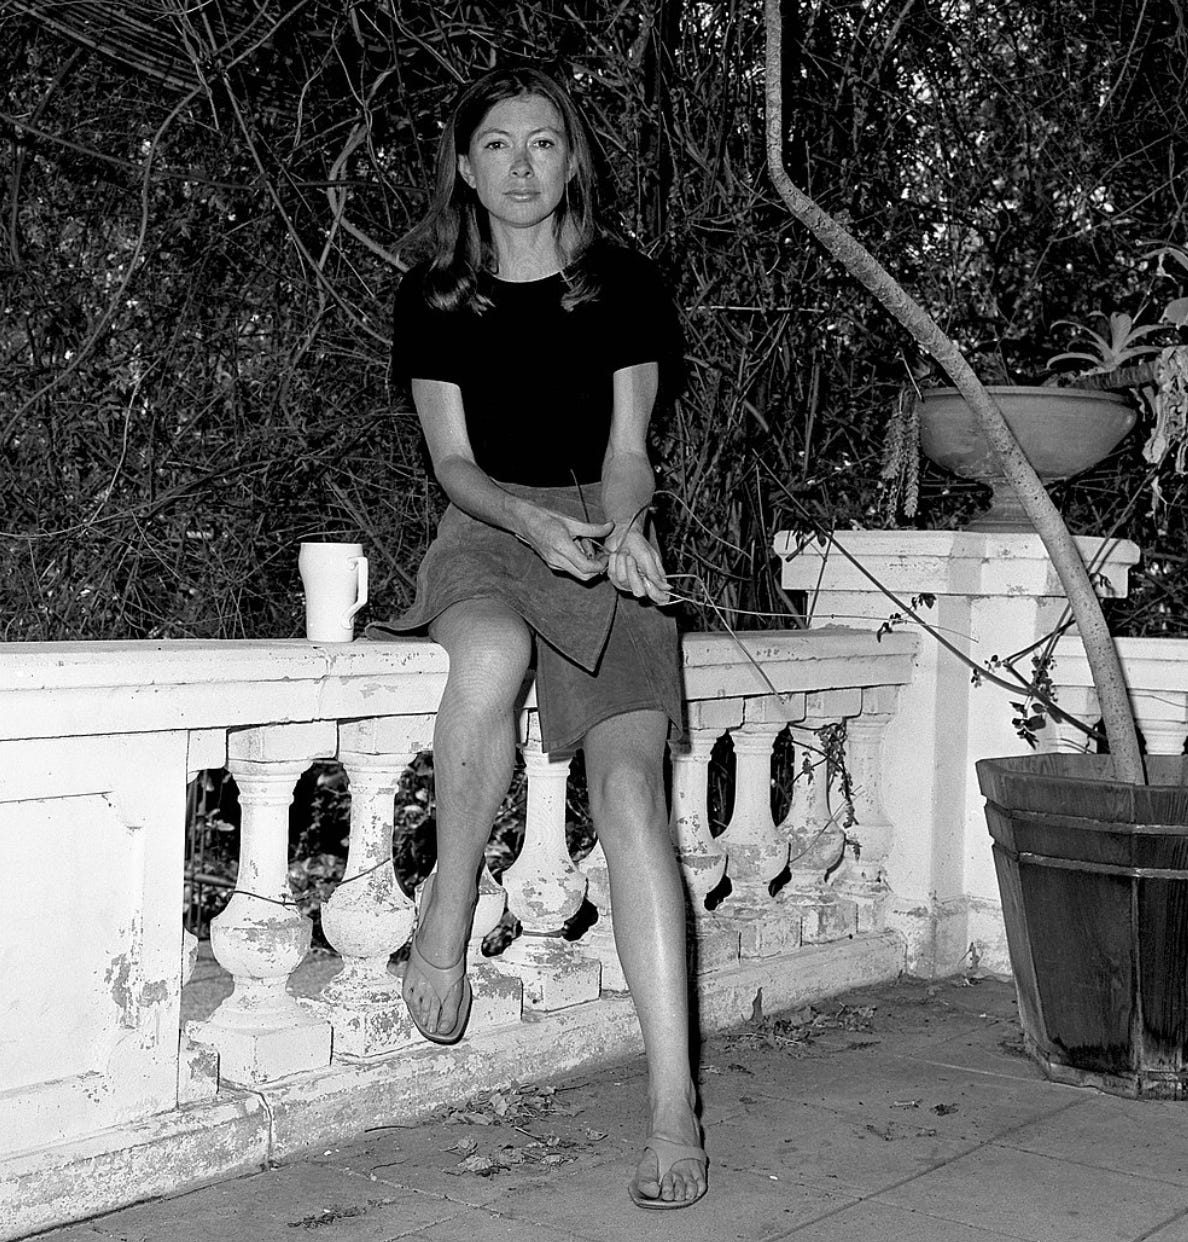 Photo of Joan Didion from 1970